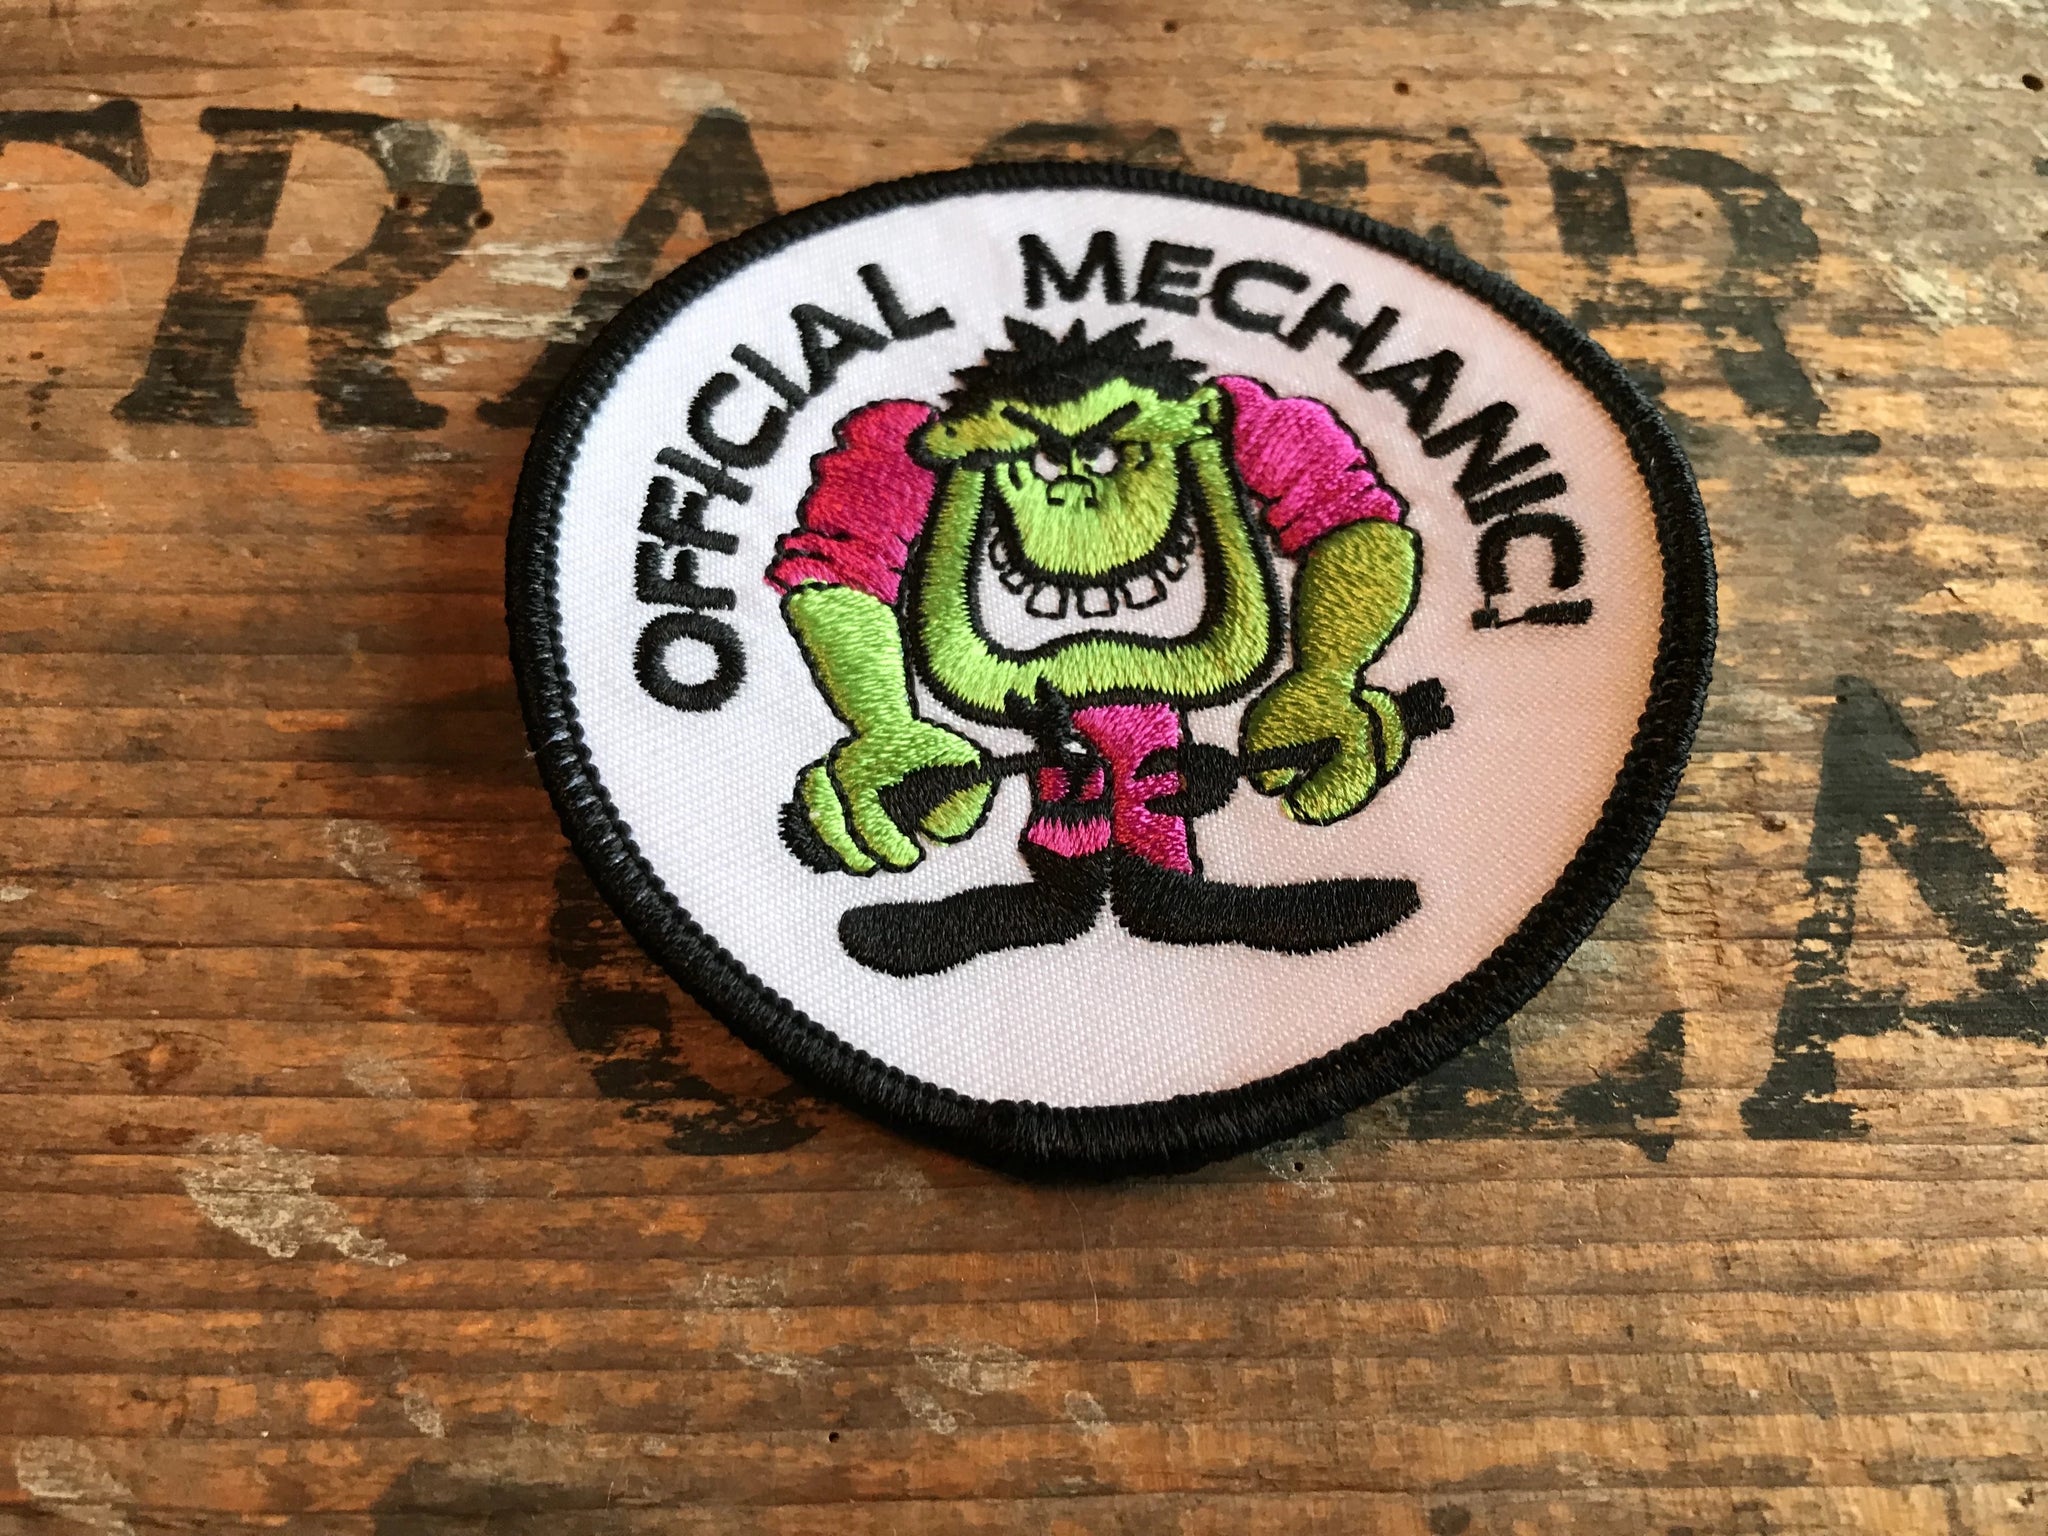 OFFICIAL MECHANIC! Monster Motorcycle Patch!